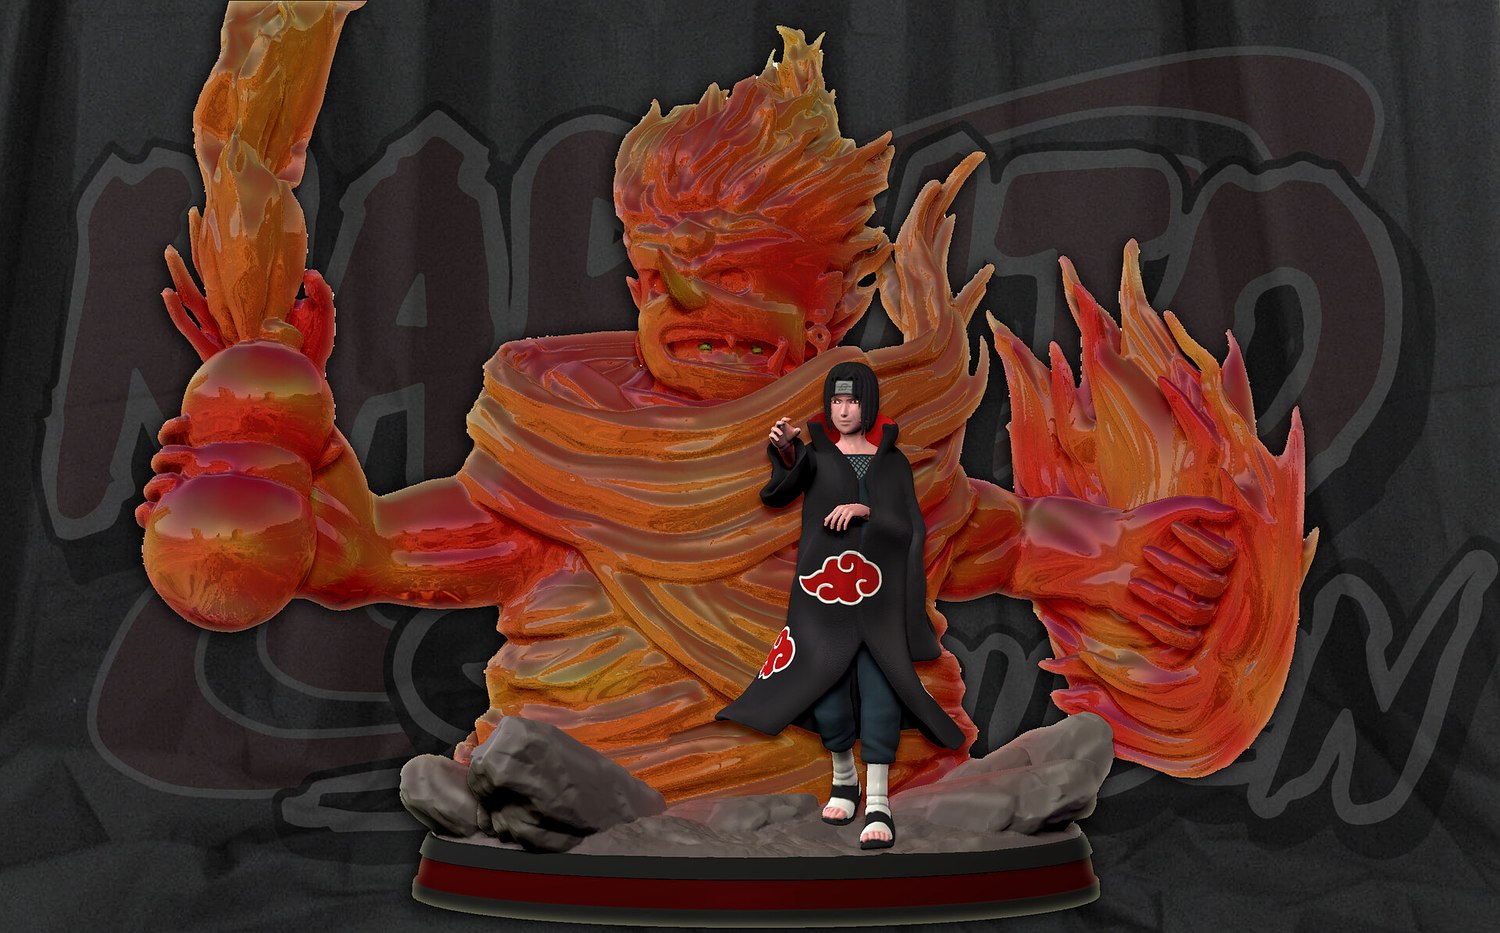 Itachi with his Susanoo from Naruto